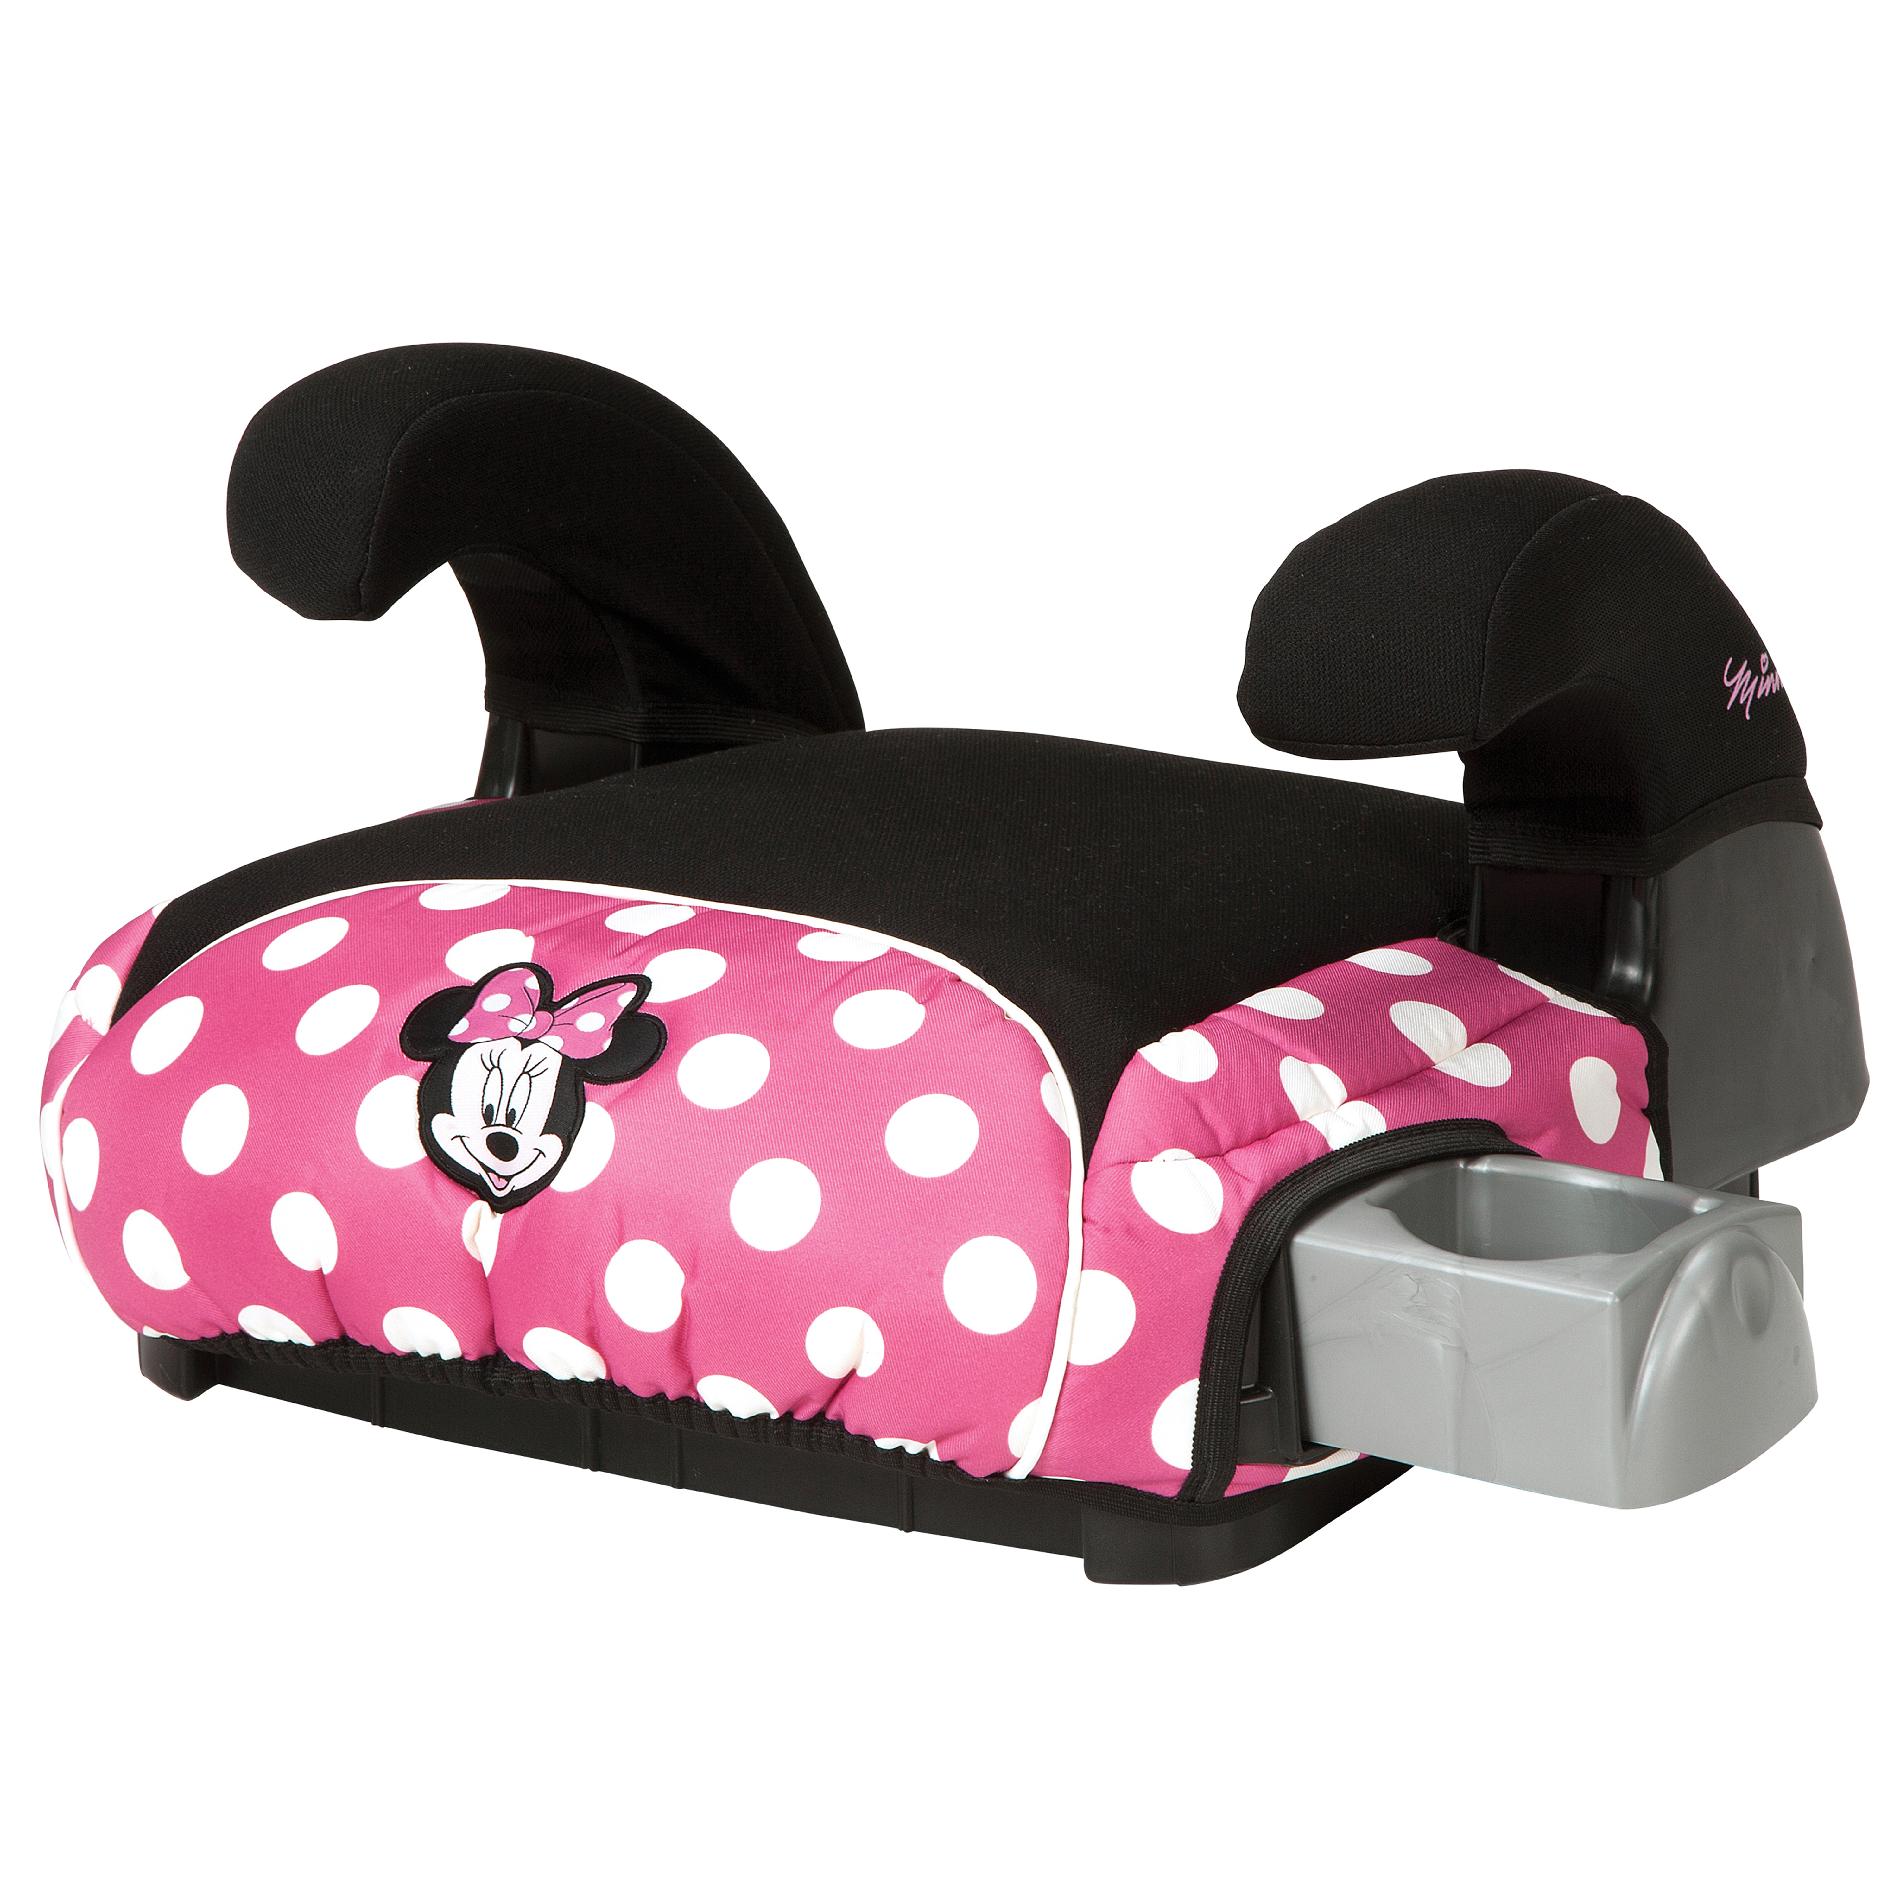 Disney Deluxe Belt-Positioning Booster Car Seat - Minnie Dot